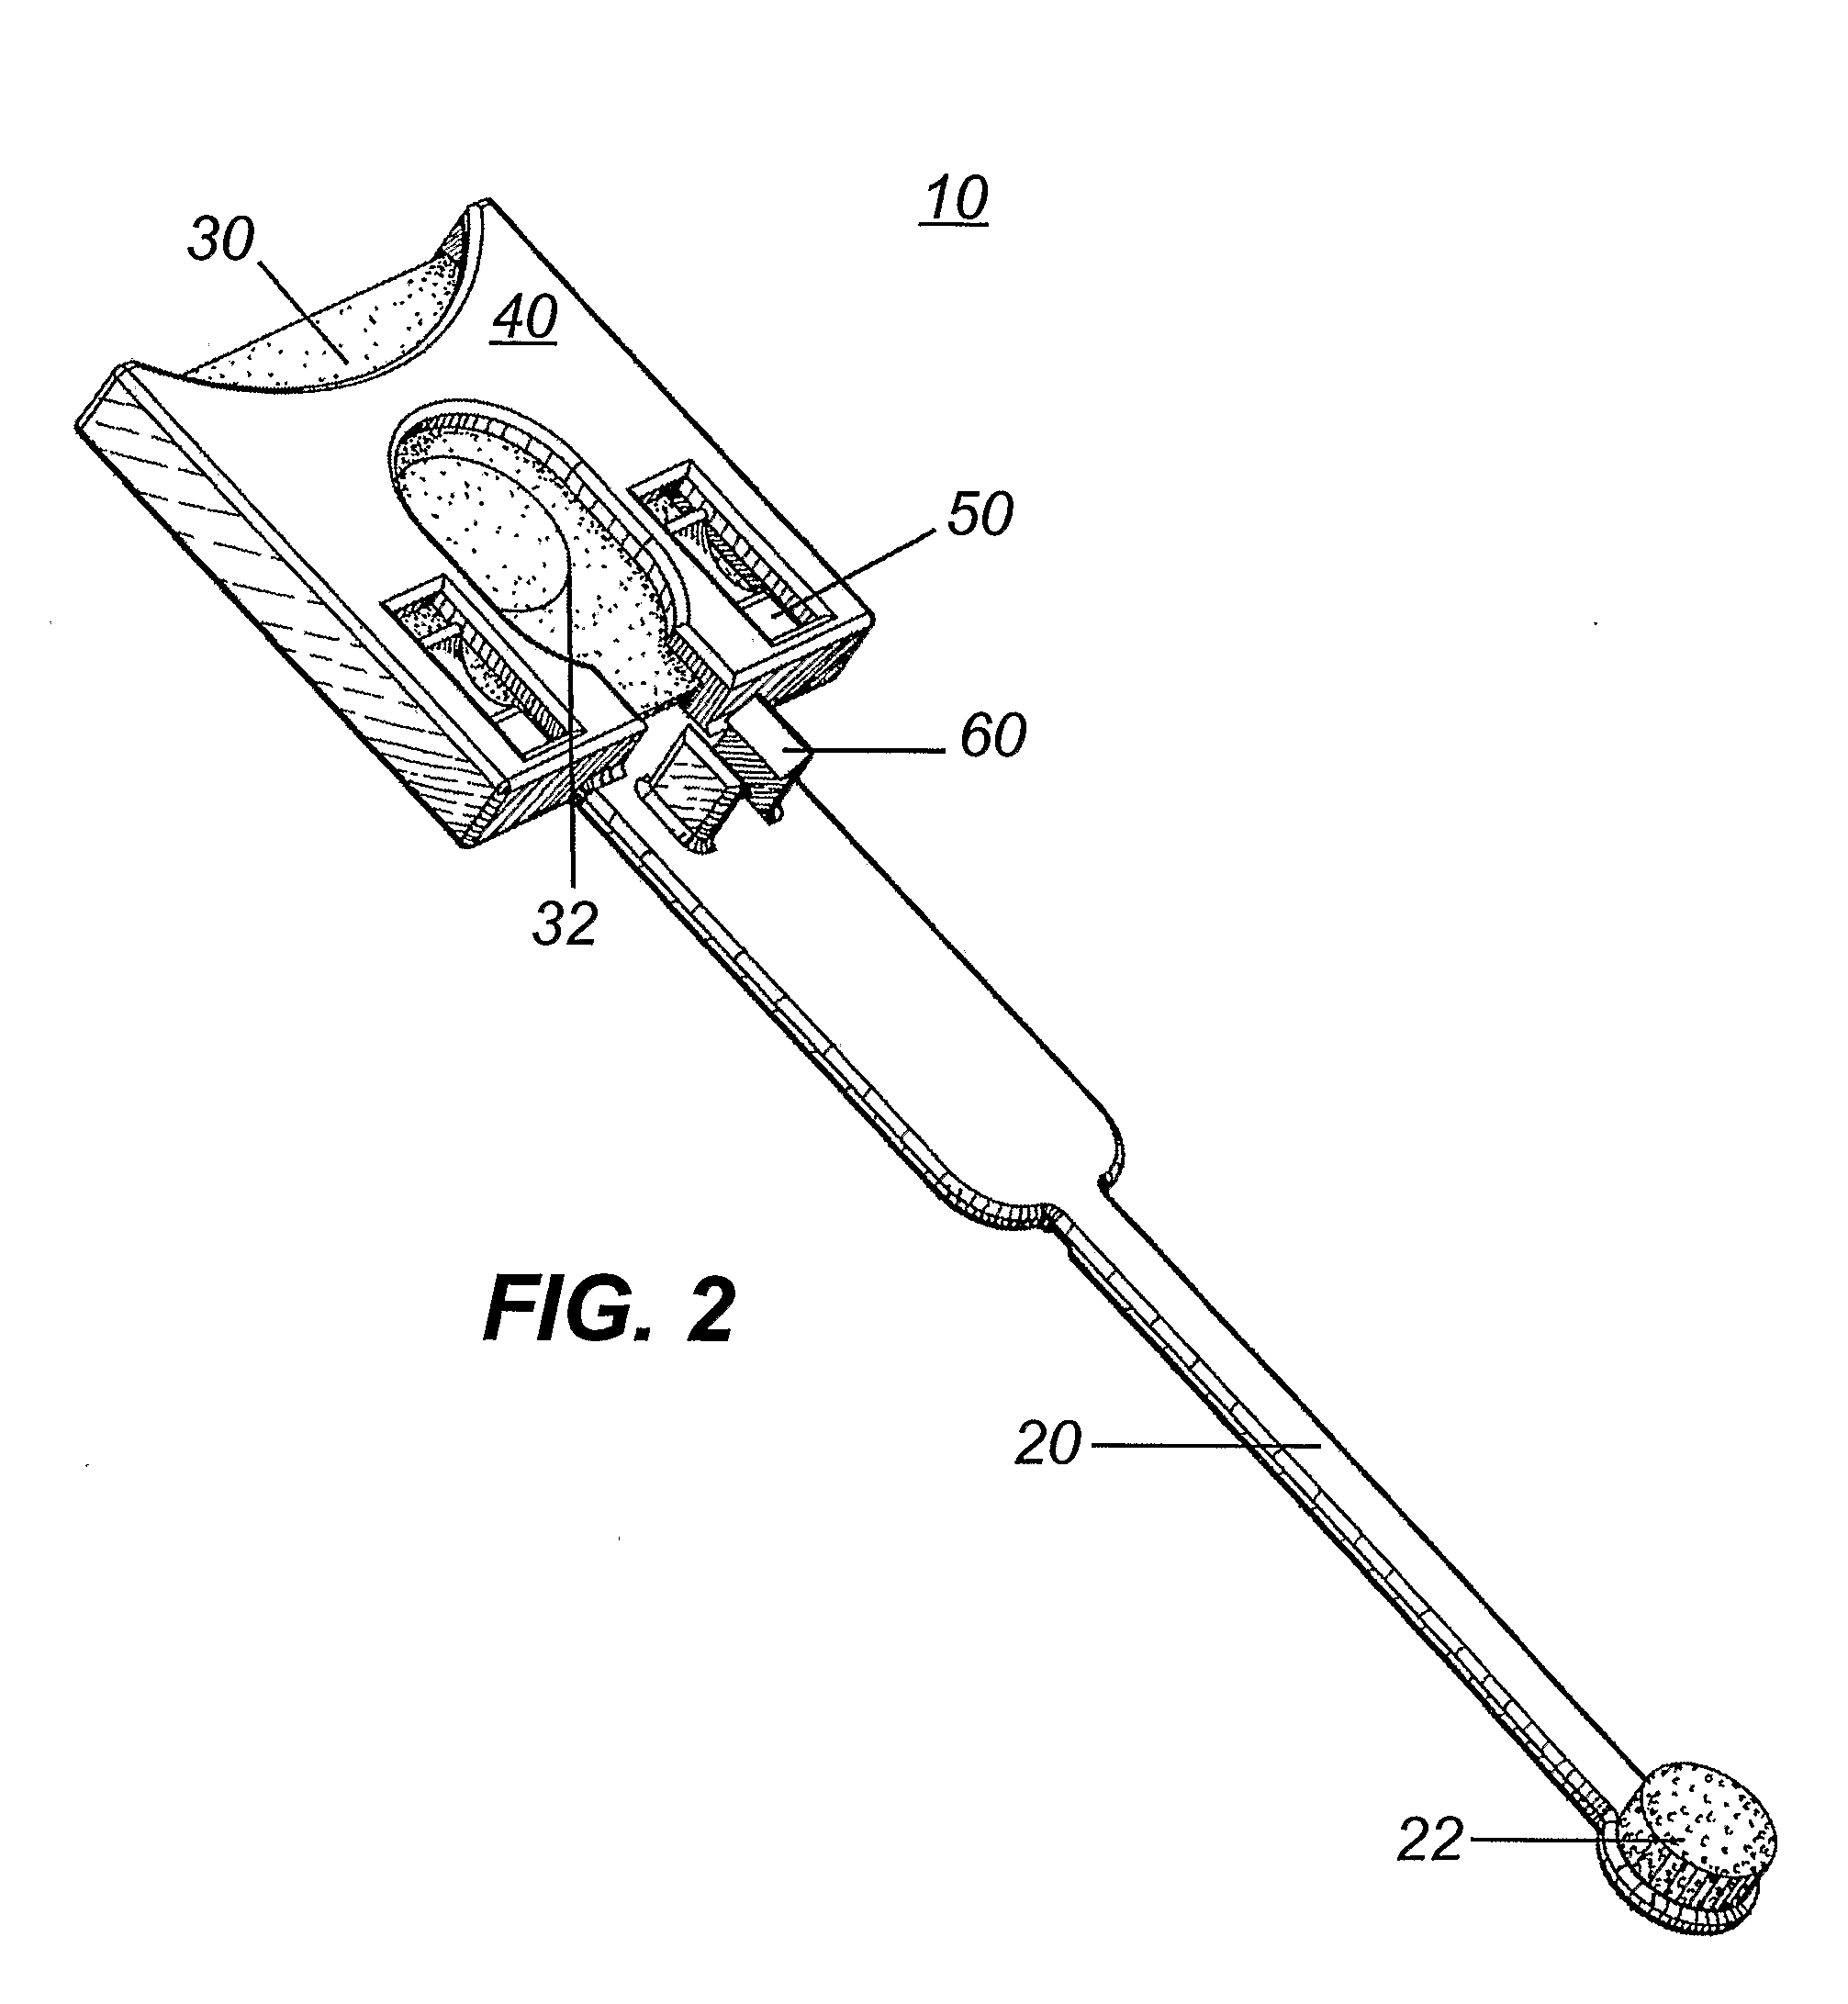 Controlled transfer biological sample collection devices and methods of using such devices